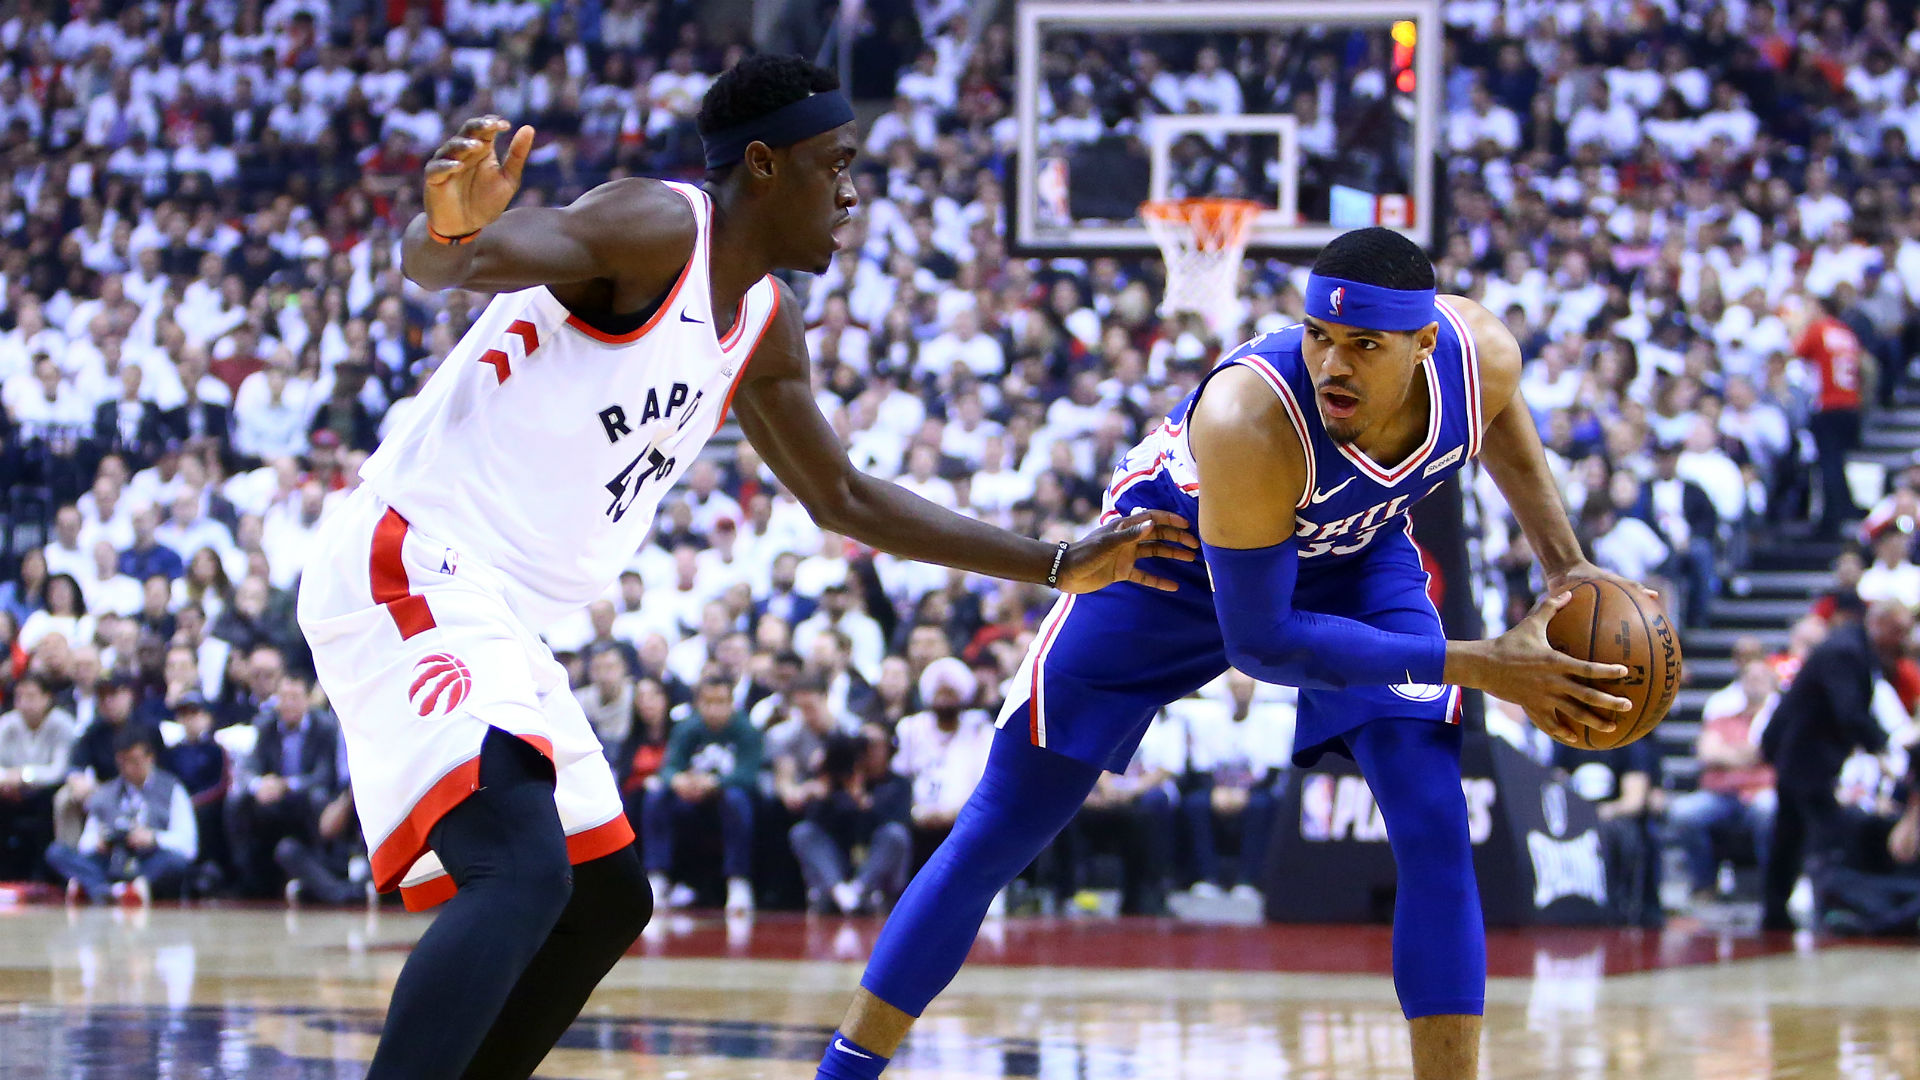 Raptors blow out 76ers in Game 5 victory | Sporting News